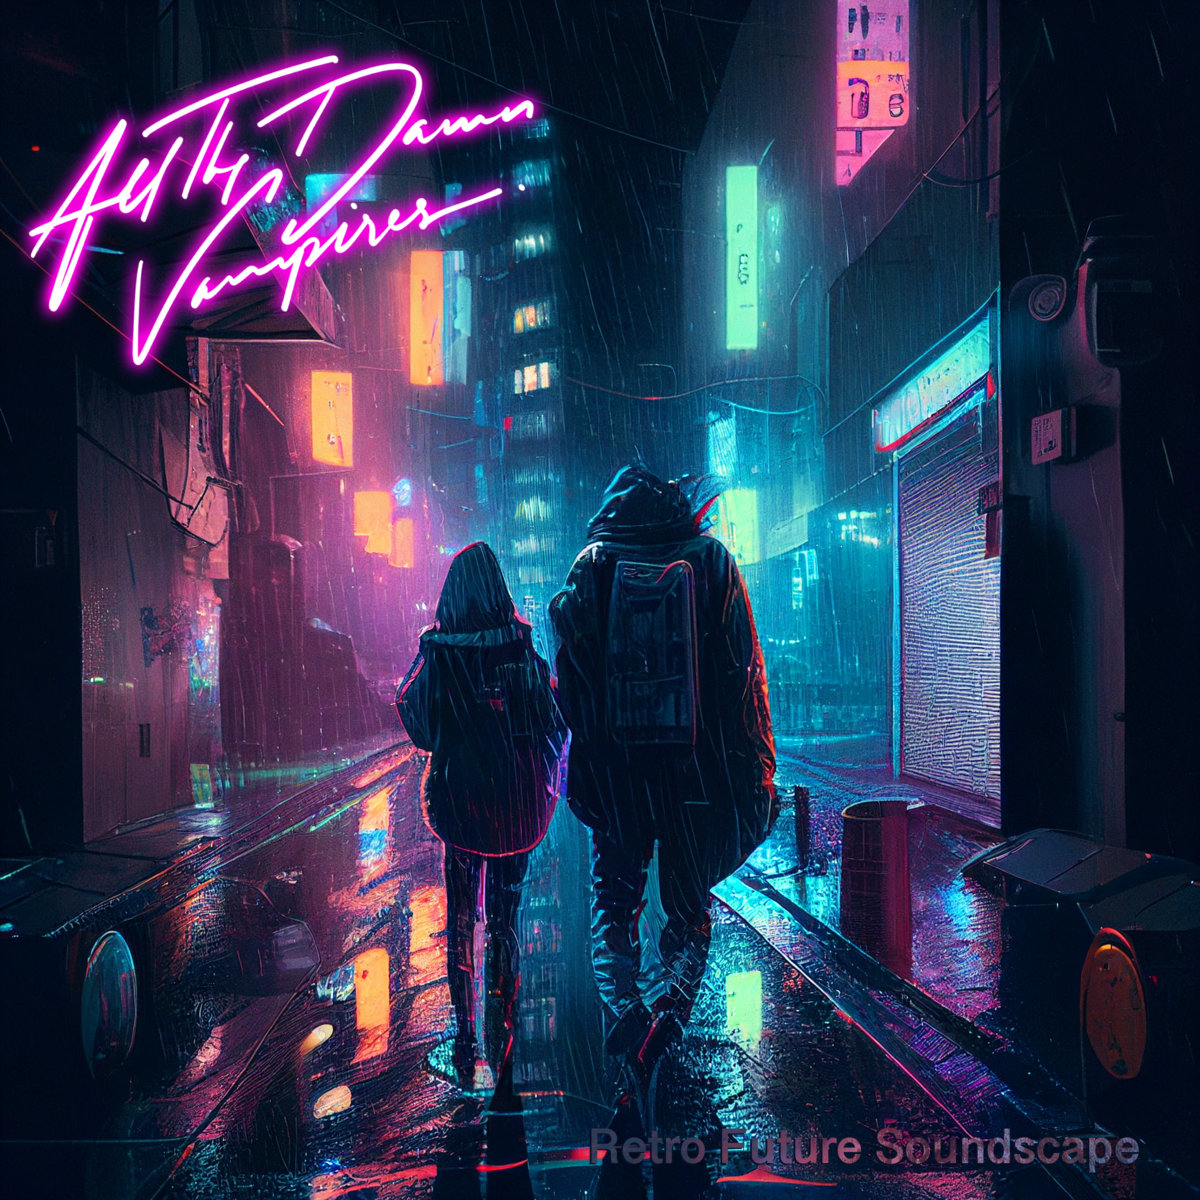 EP REVIEW: Retro Future Soundscape by All the Damn Vampires